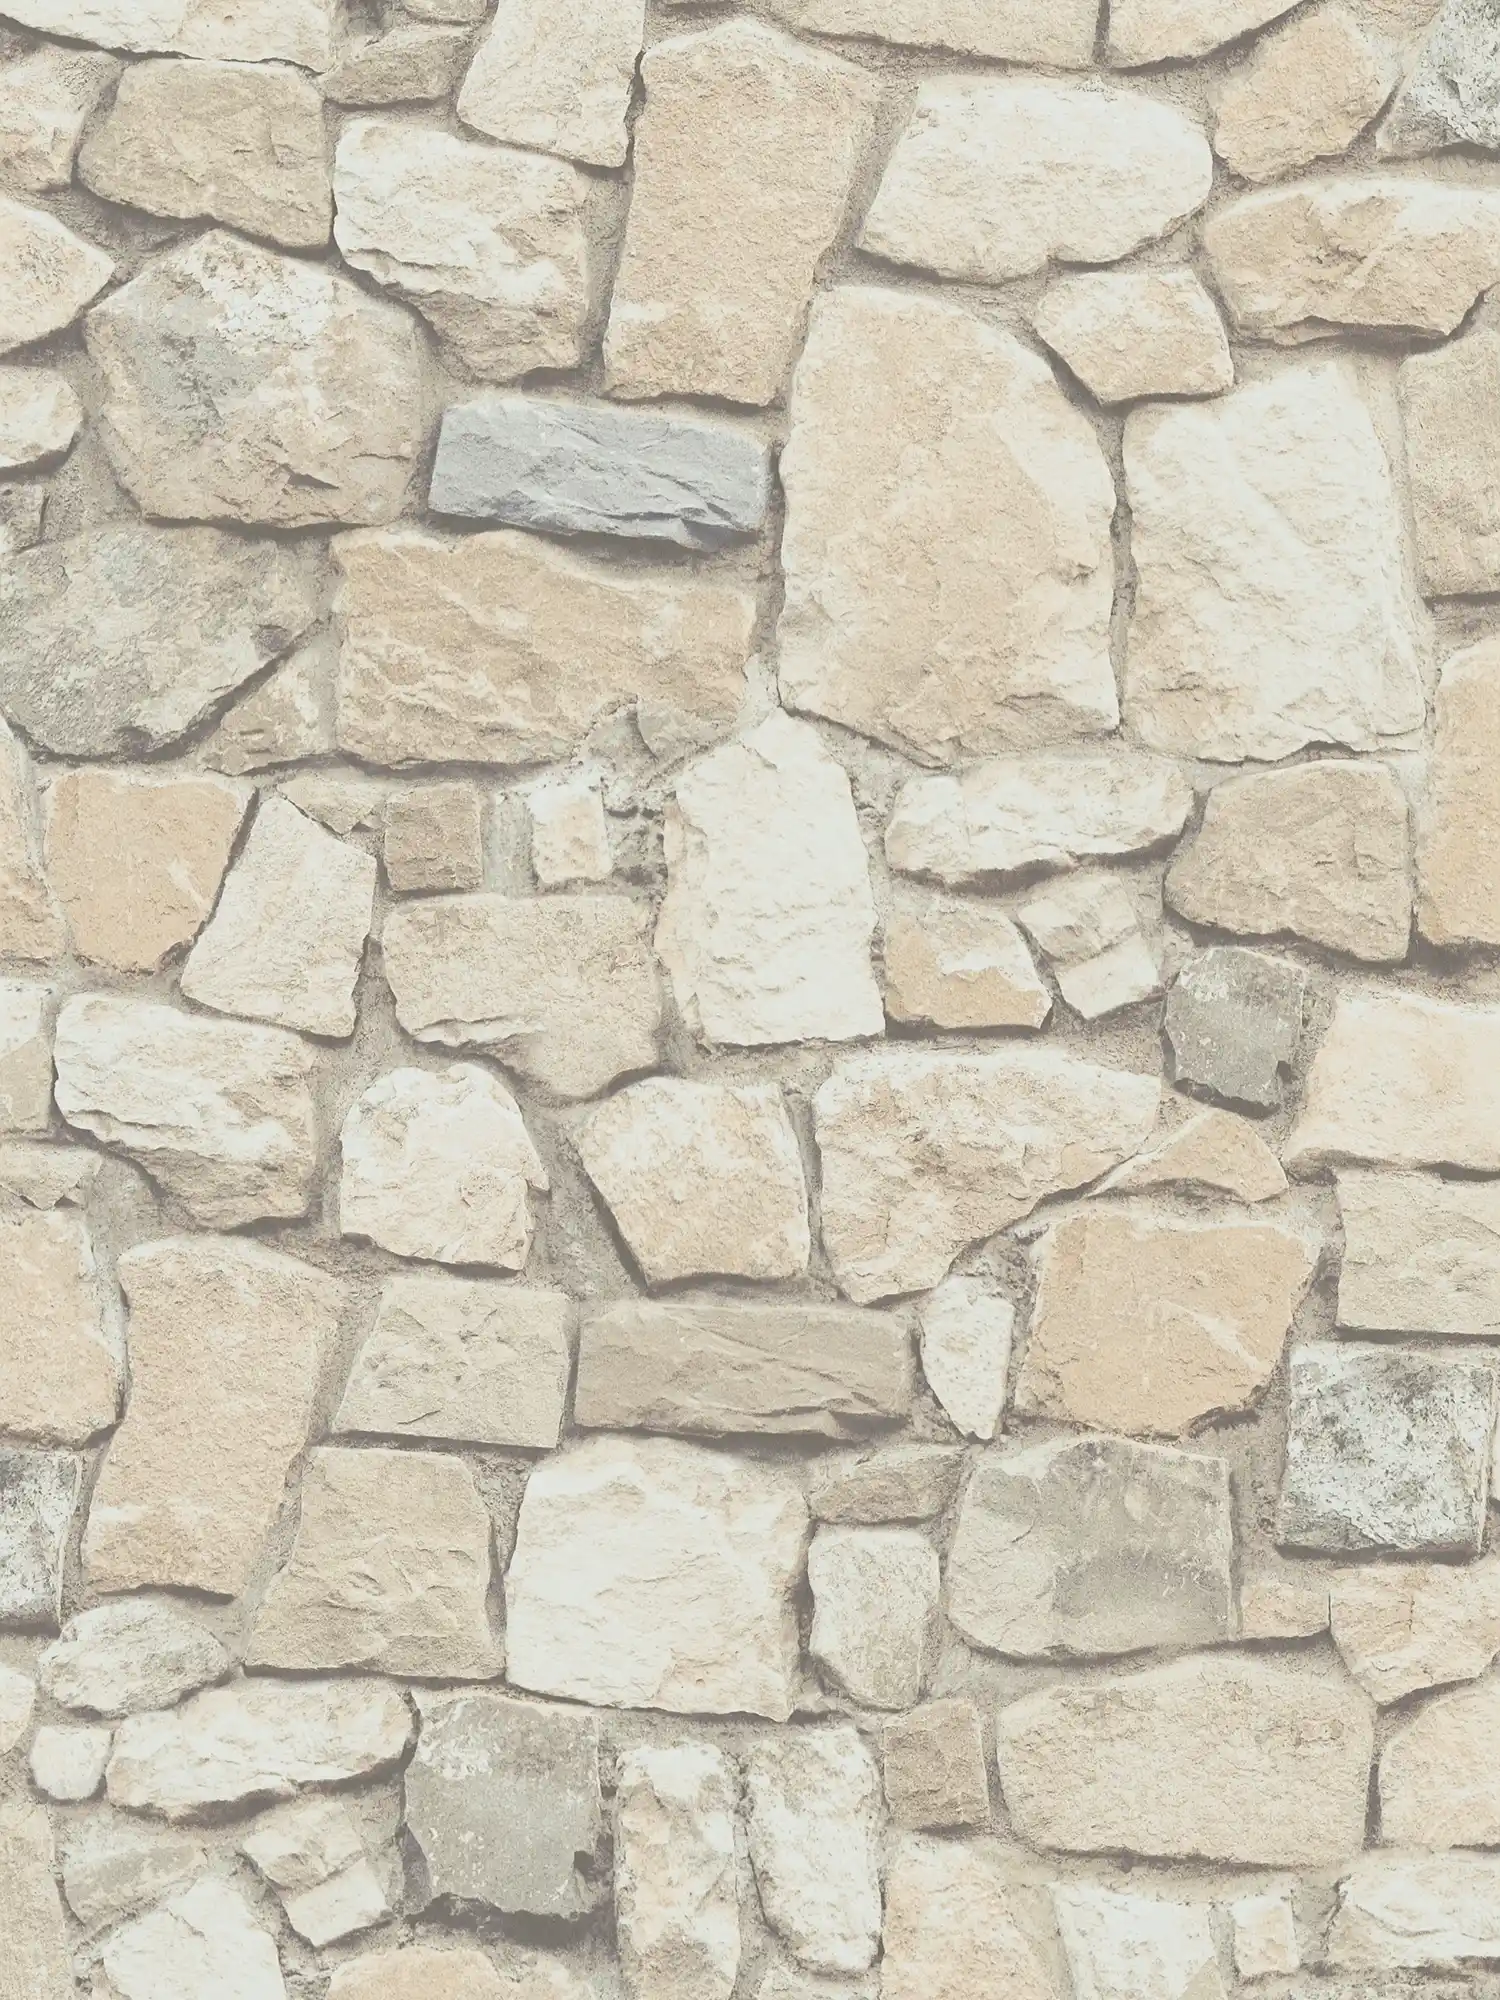 Self-adhesive wallpaper | natural stone look with 3D effect - beige, cream
